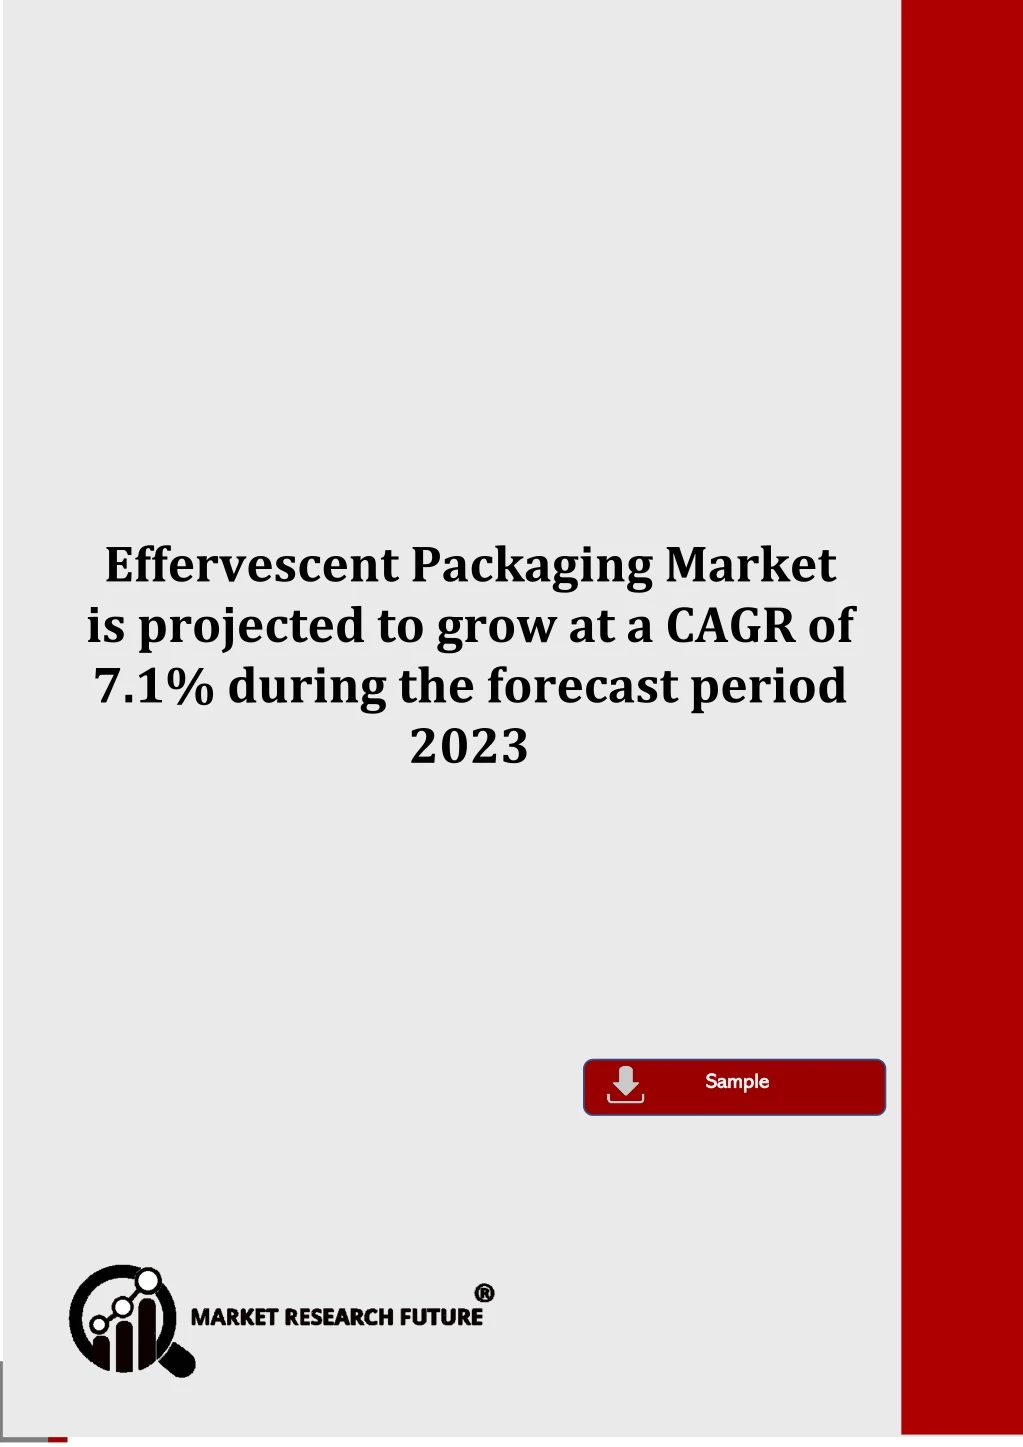 effervescent packaging market is projected